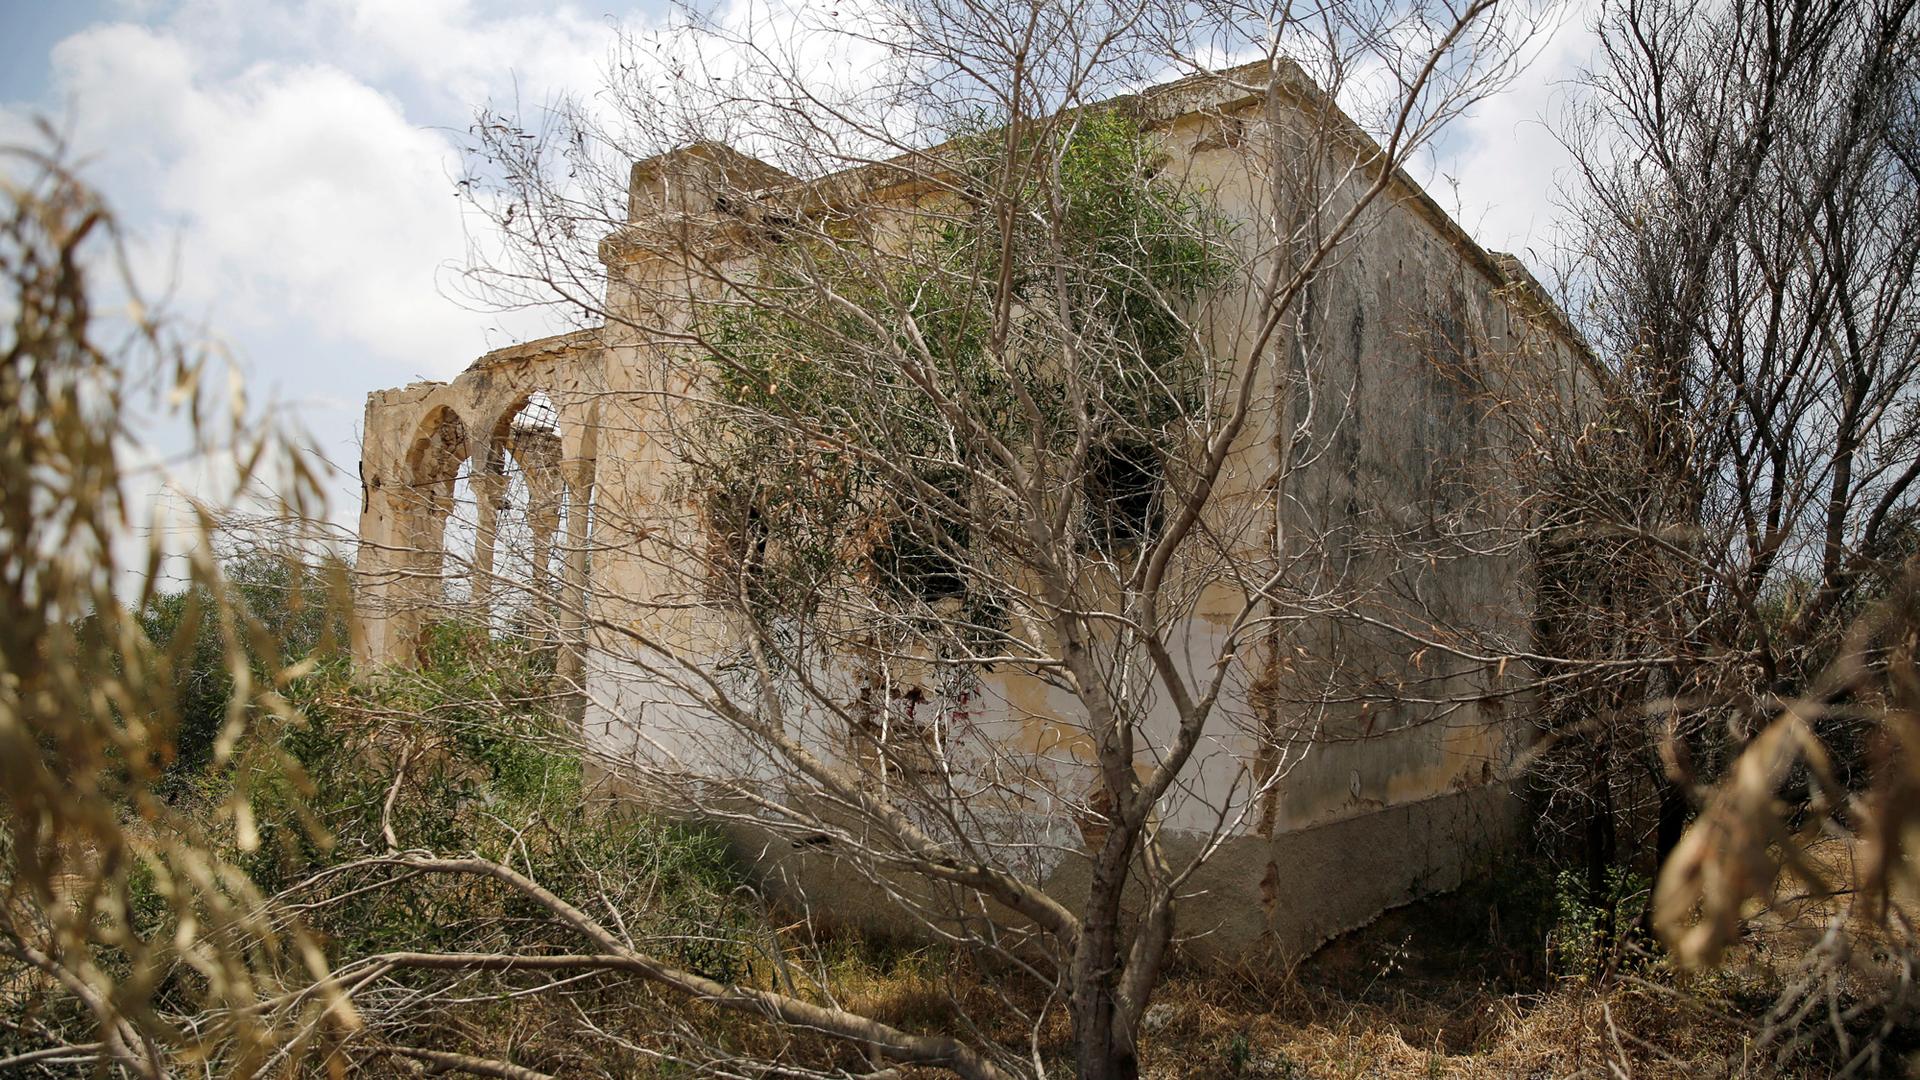 A stone building is crumbling and surrounded by tree branches